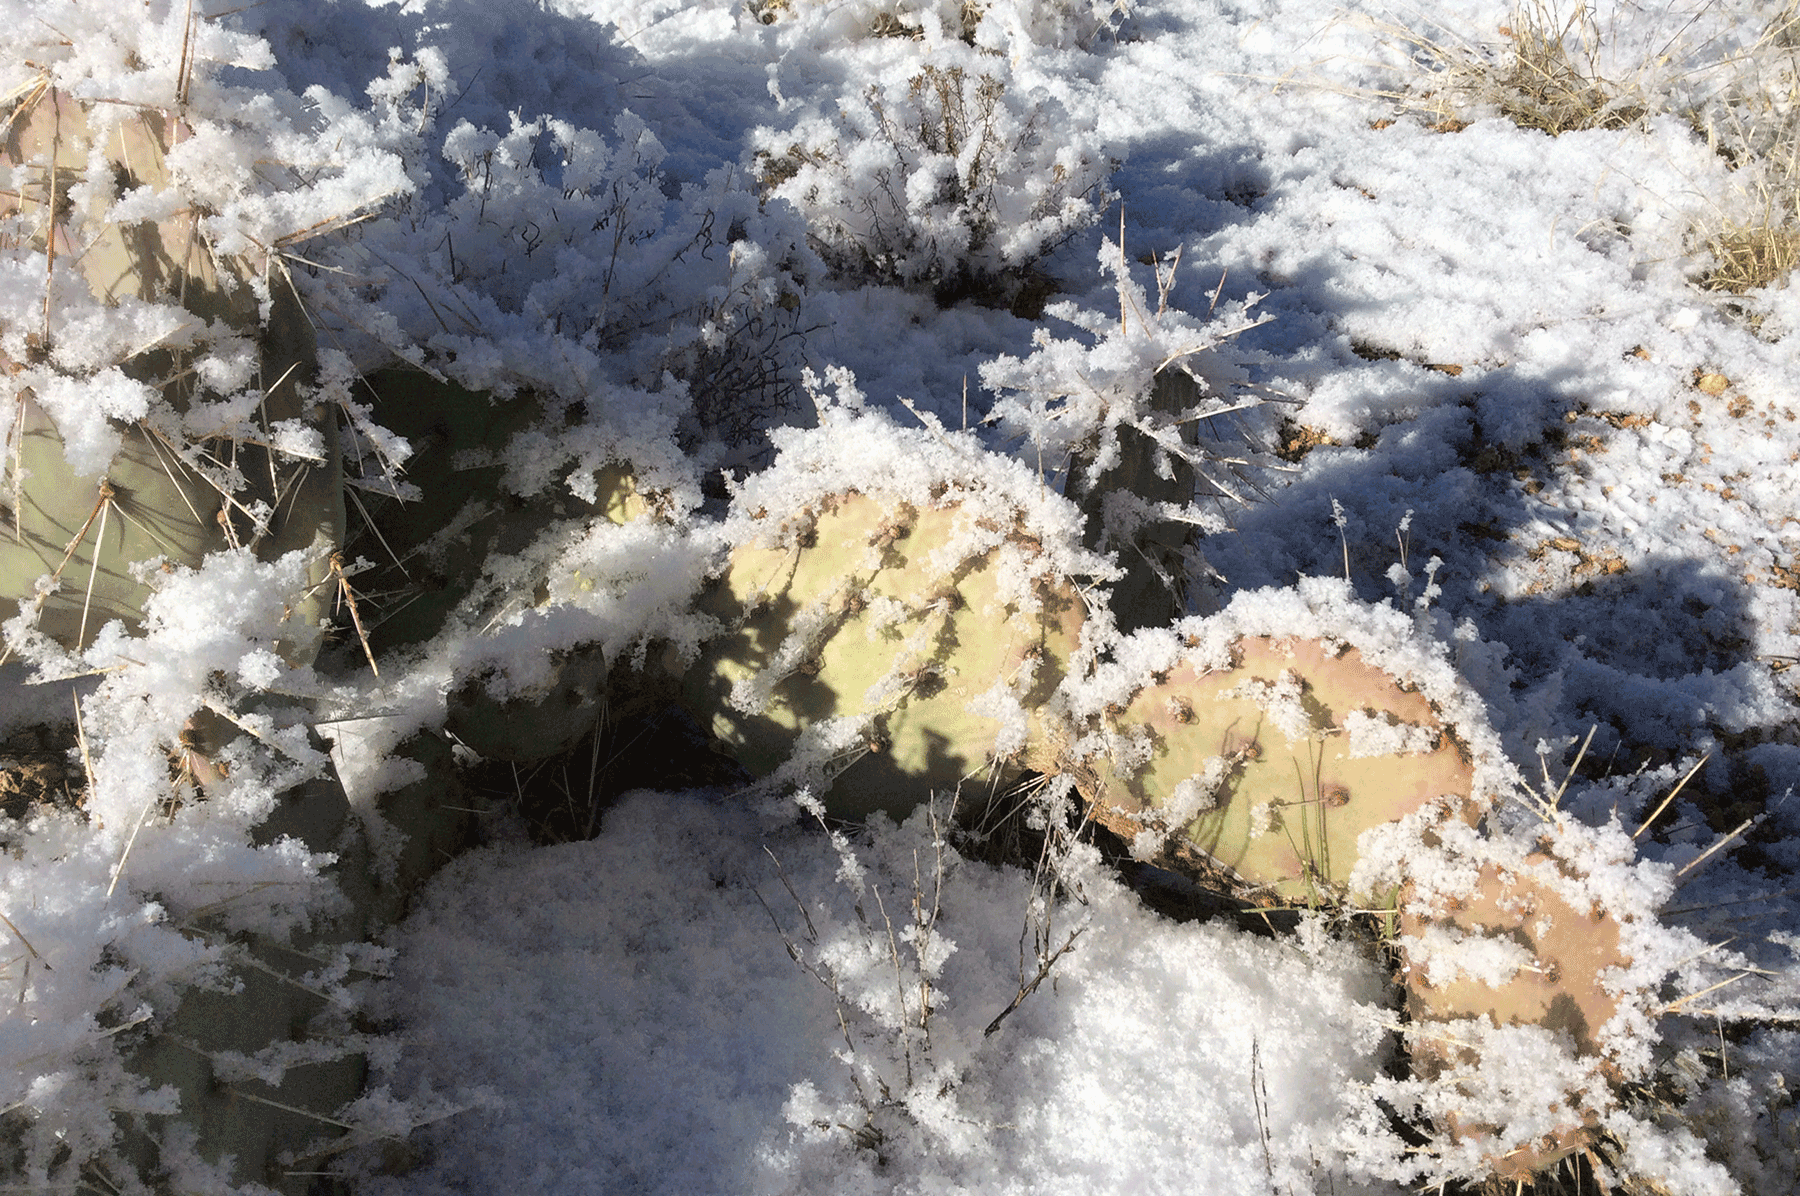  Prickly Pear and hoar frost 